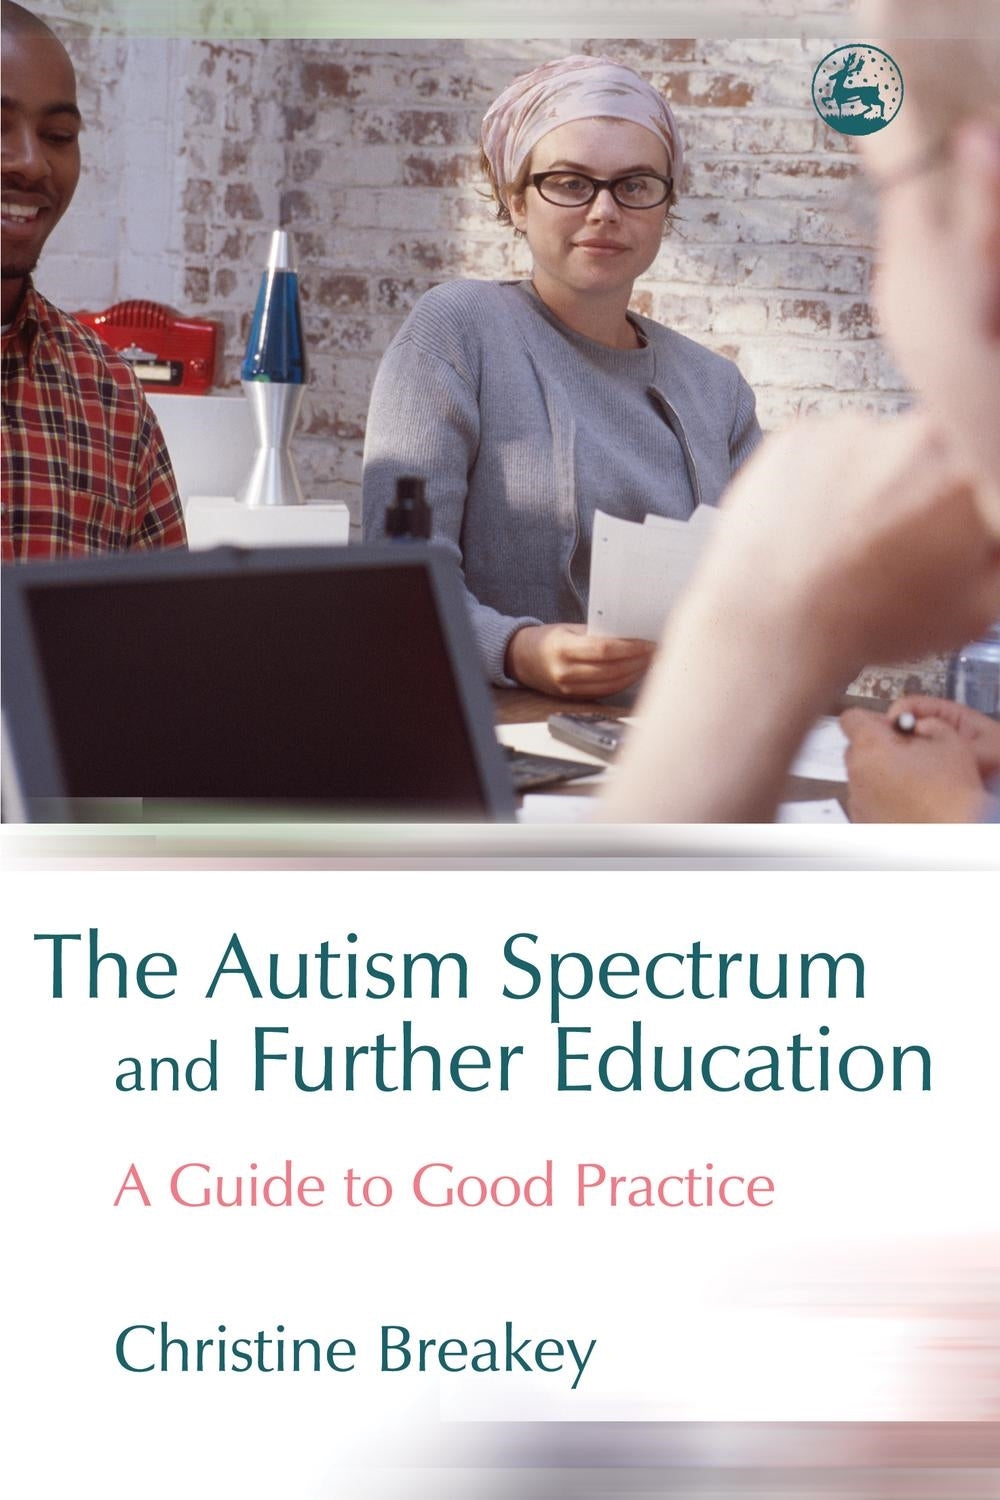 The Autism Spectrum and Further Education by Christine Breakey